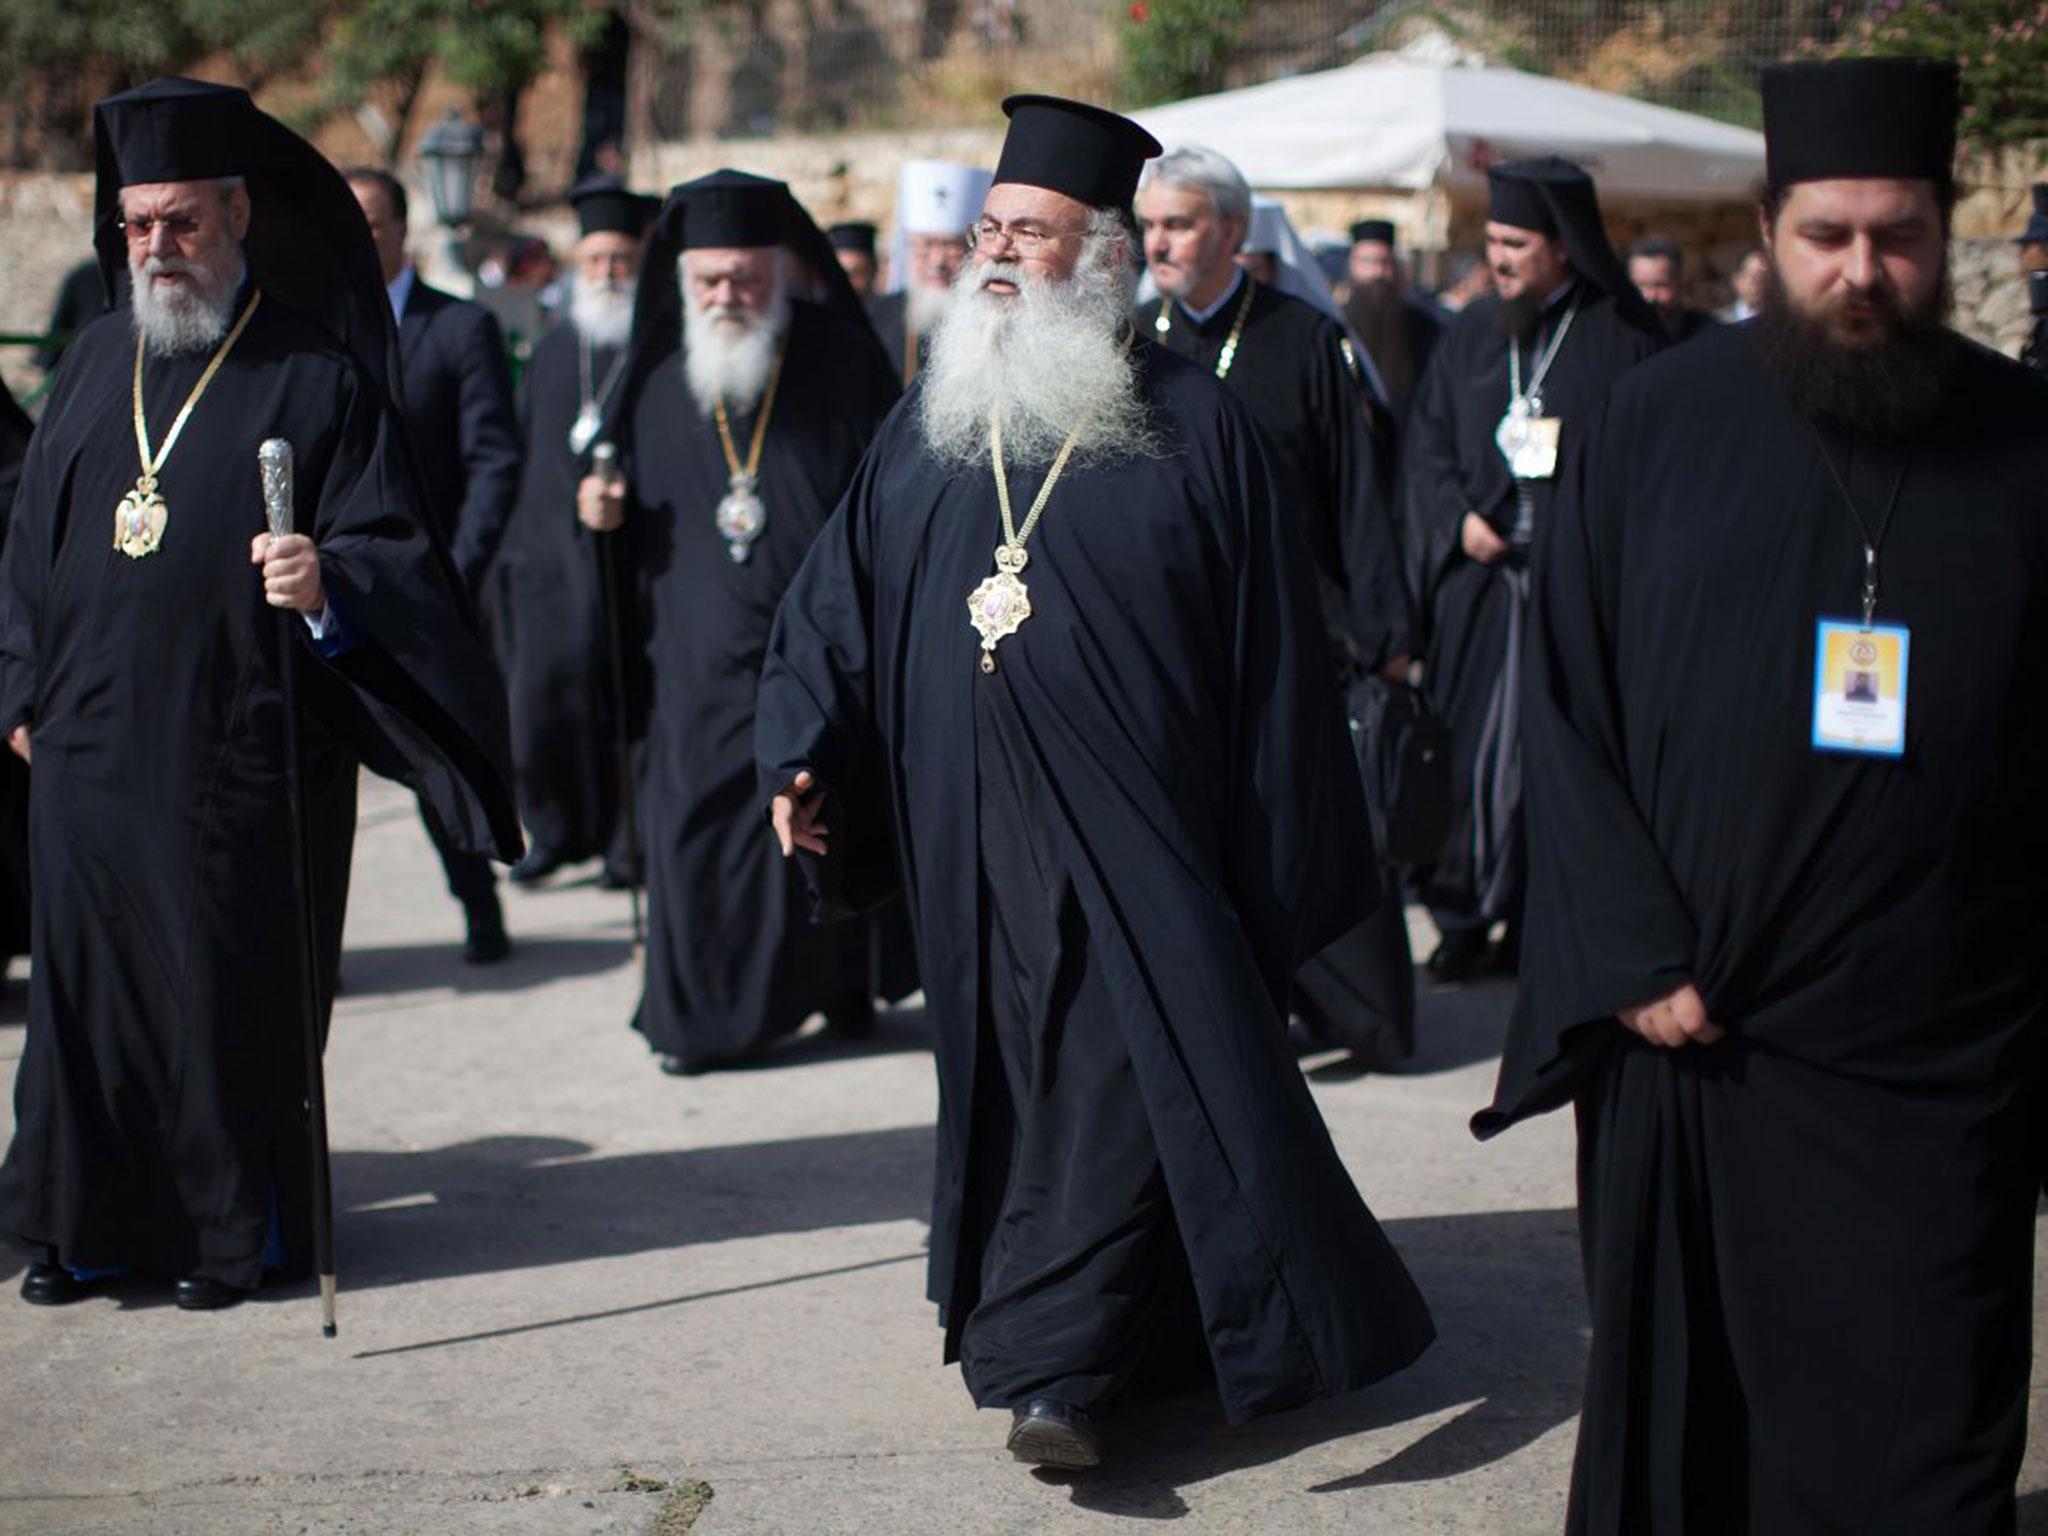 Delegates arrive at the Orthodox Academy of the Greek island of Crete to take part in an meeting between leaders of Orthodox churches.